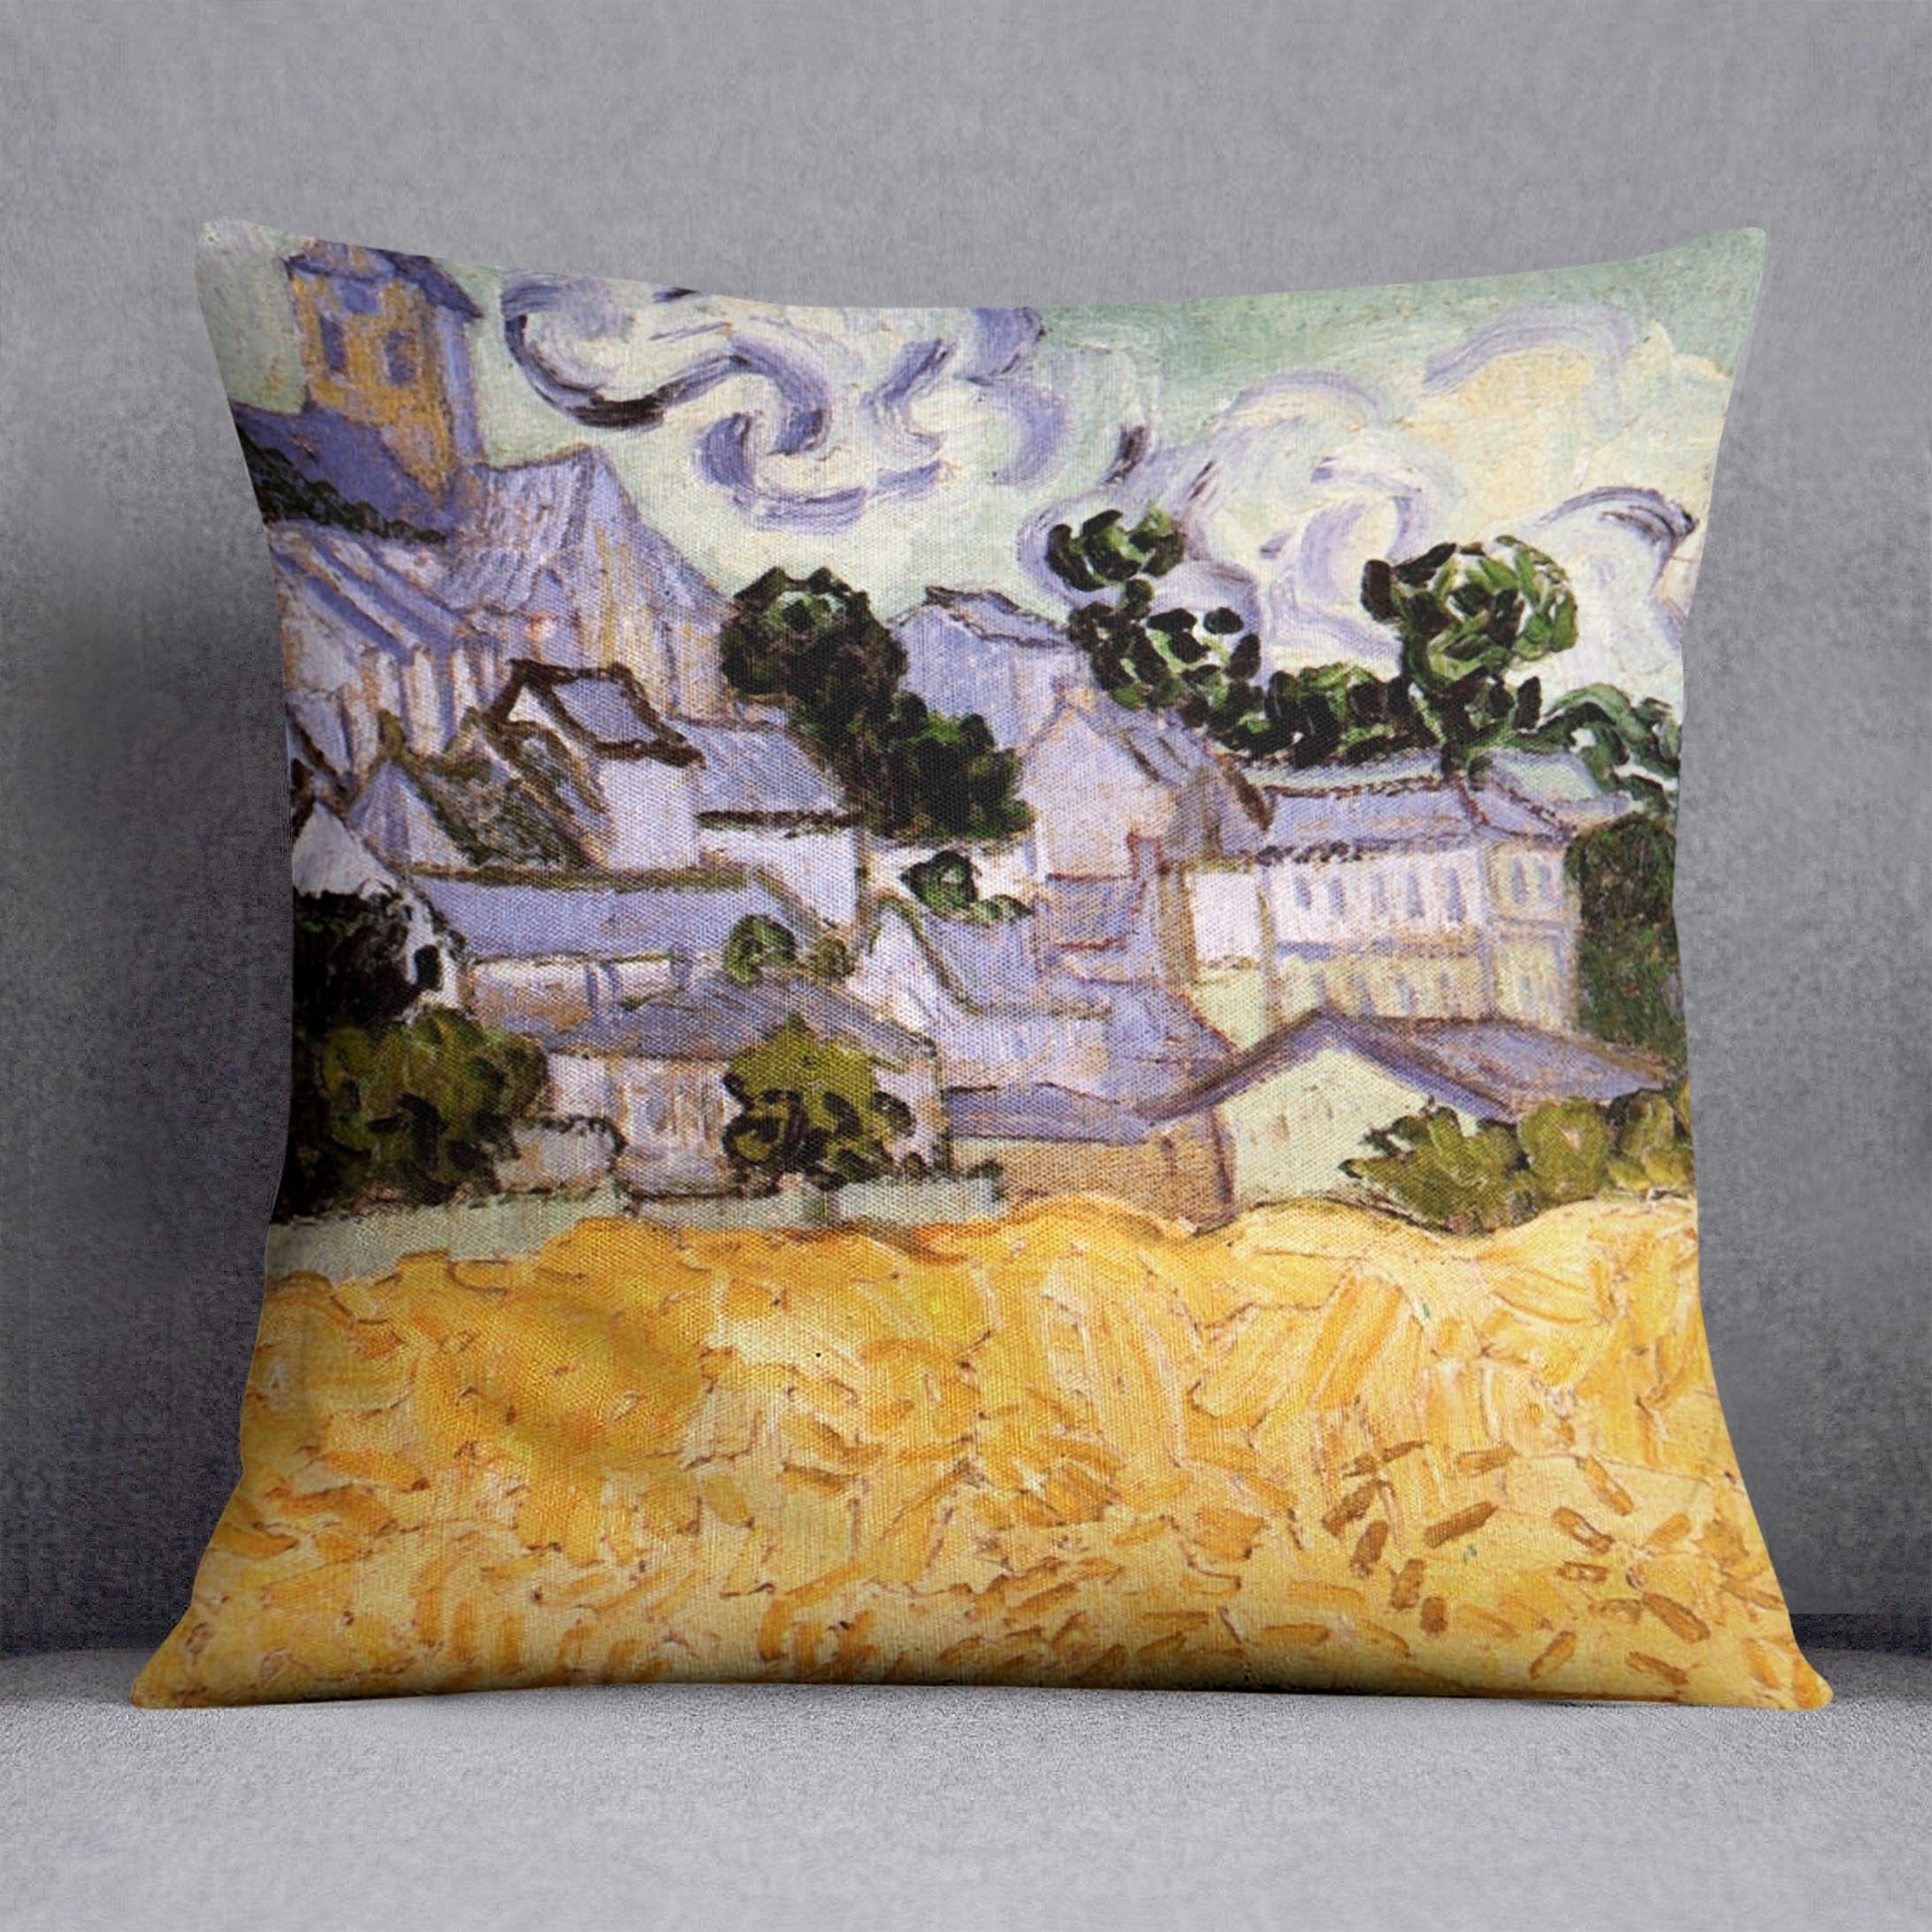 View of Auvers with Church by Van Gogh Throw Pillow